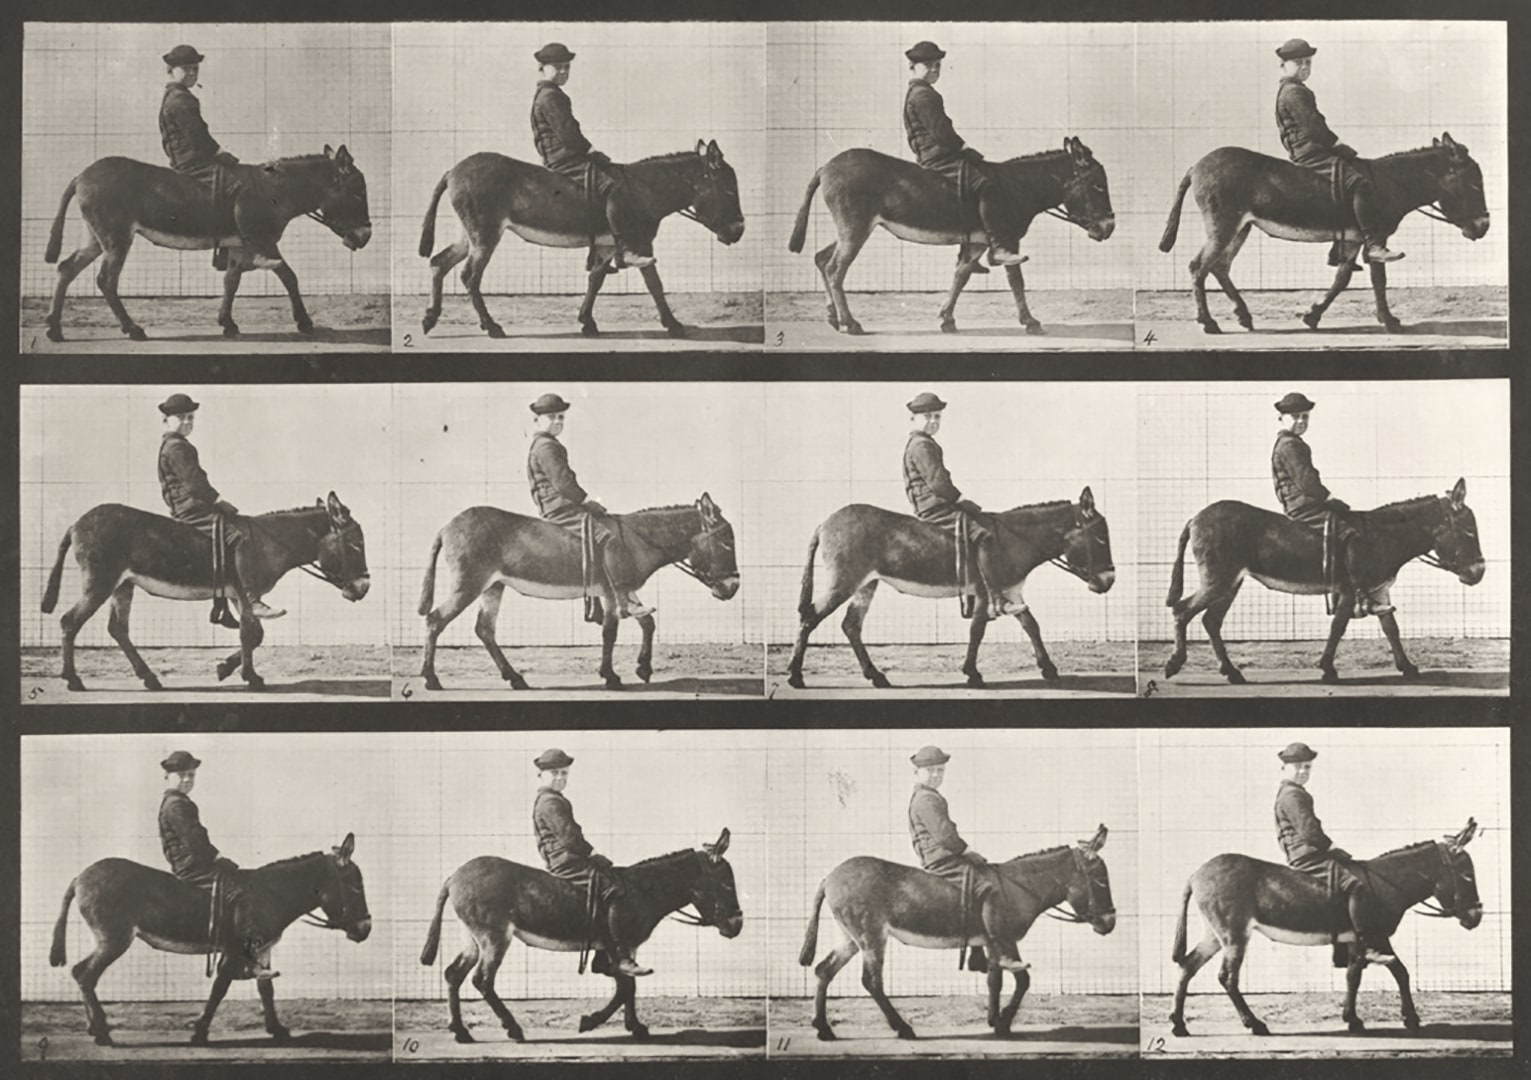 Sequence of black and white photos showing the movements of a young boy riding a donkey